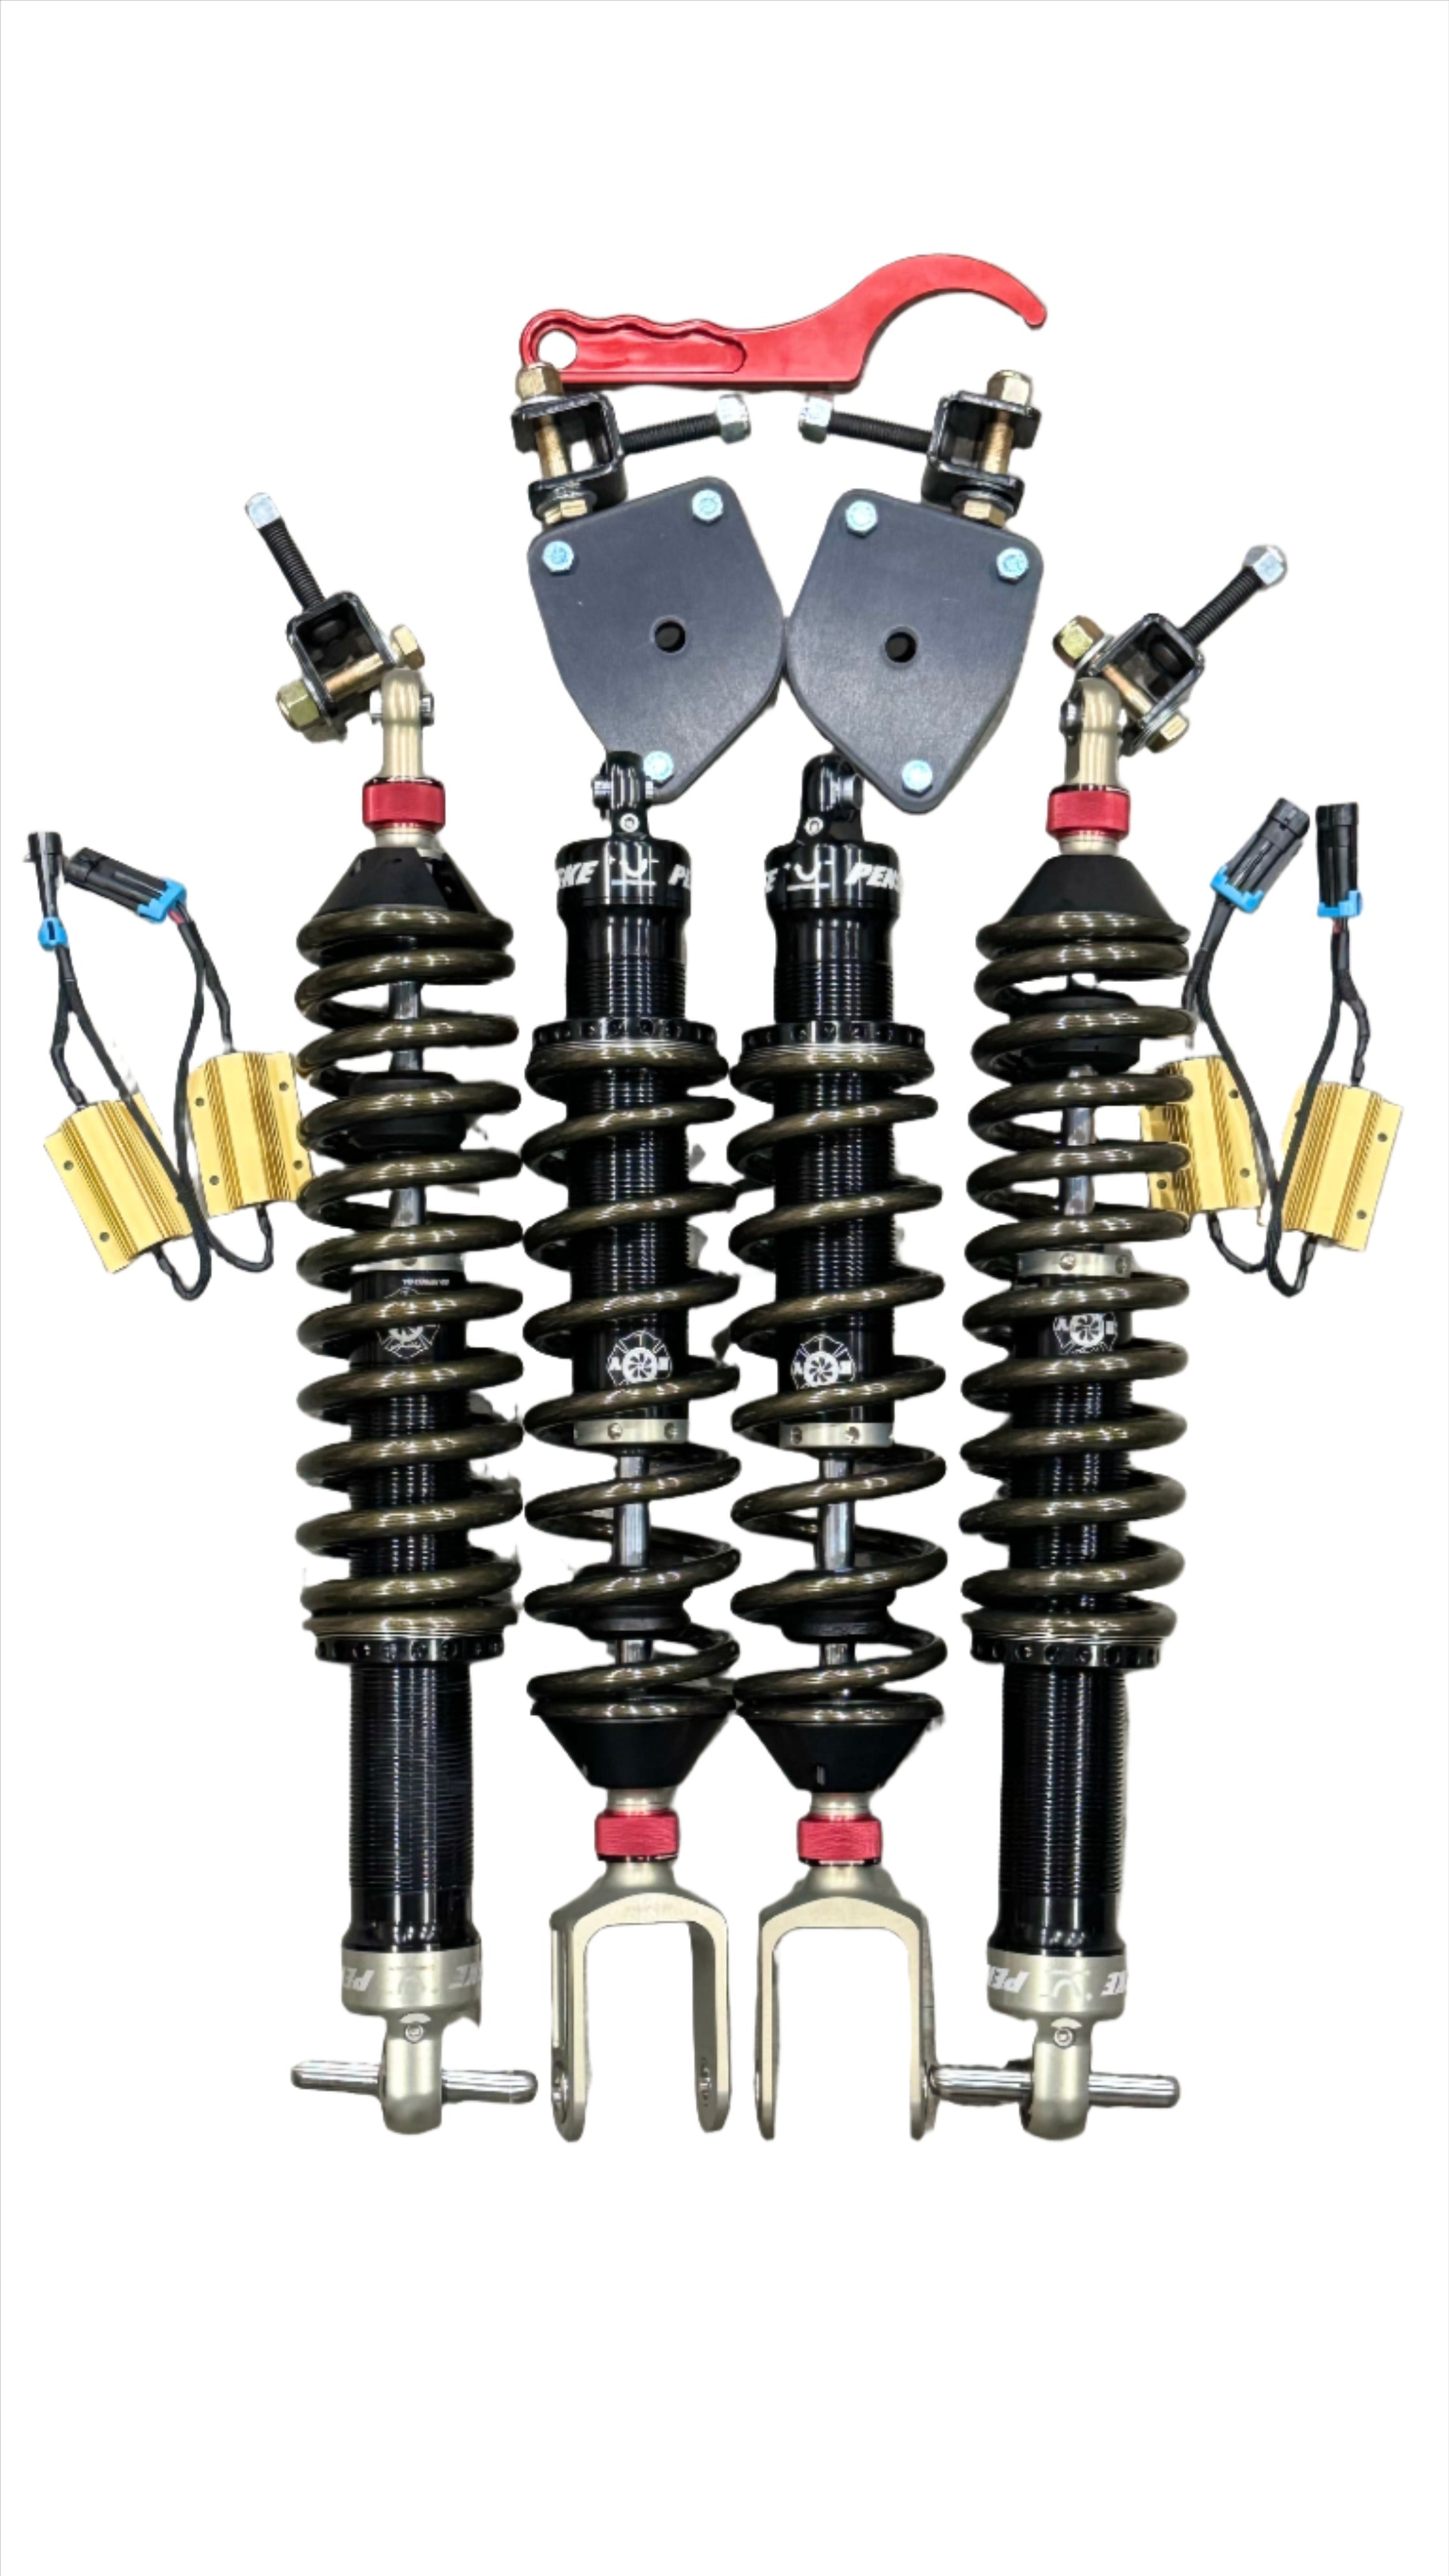 Ahobbs/Penske Front and Rear Full Coilover kit w/ Mag Ride deletes and Mounts